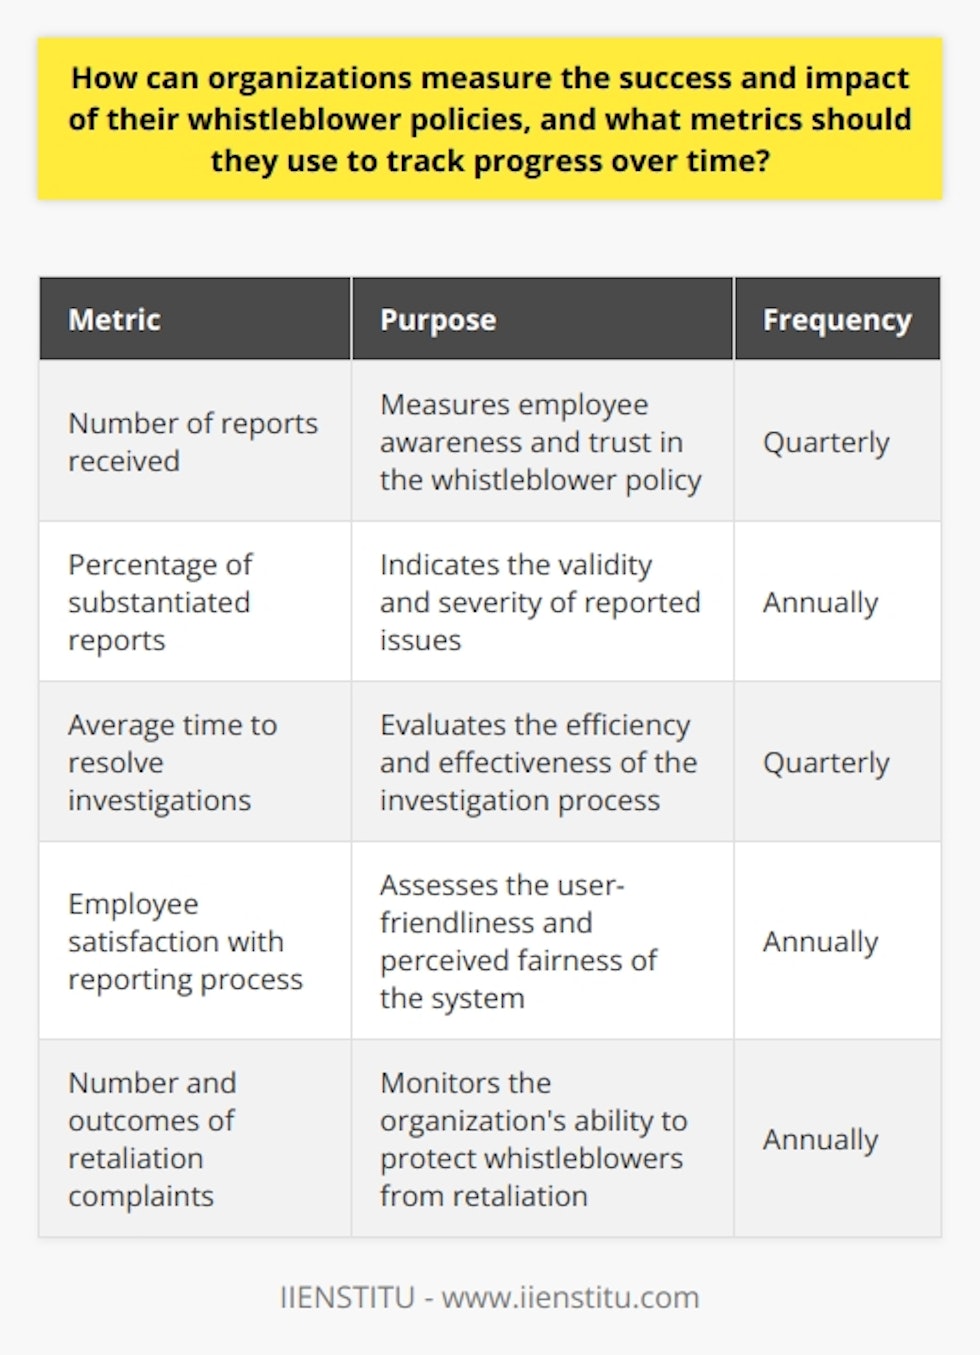 Organizations can measure the success and impact of their whistleblower policies through a variety of metrics, such as the number of reports received, the percentage of reports that are substantiated, the average time to resolve investigations, and the level of employee satisfaction with the reporting process. They can also track the number of retaliation complaints and the outcomes of those complaints. Regular surveys and focus groups can provide valuable feedback on the effectiveness of the policy and identify areas for improvement.